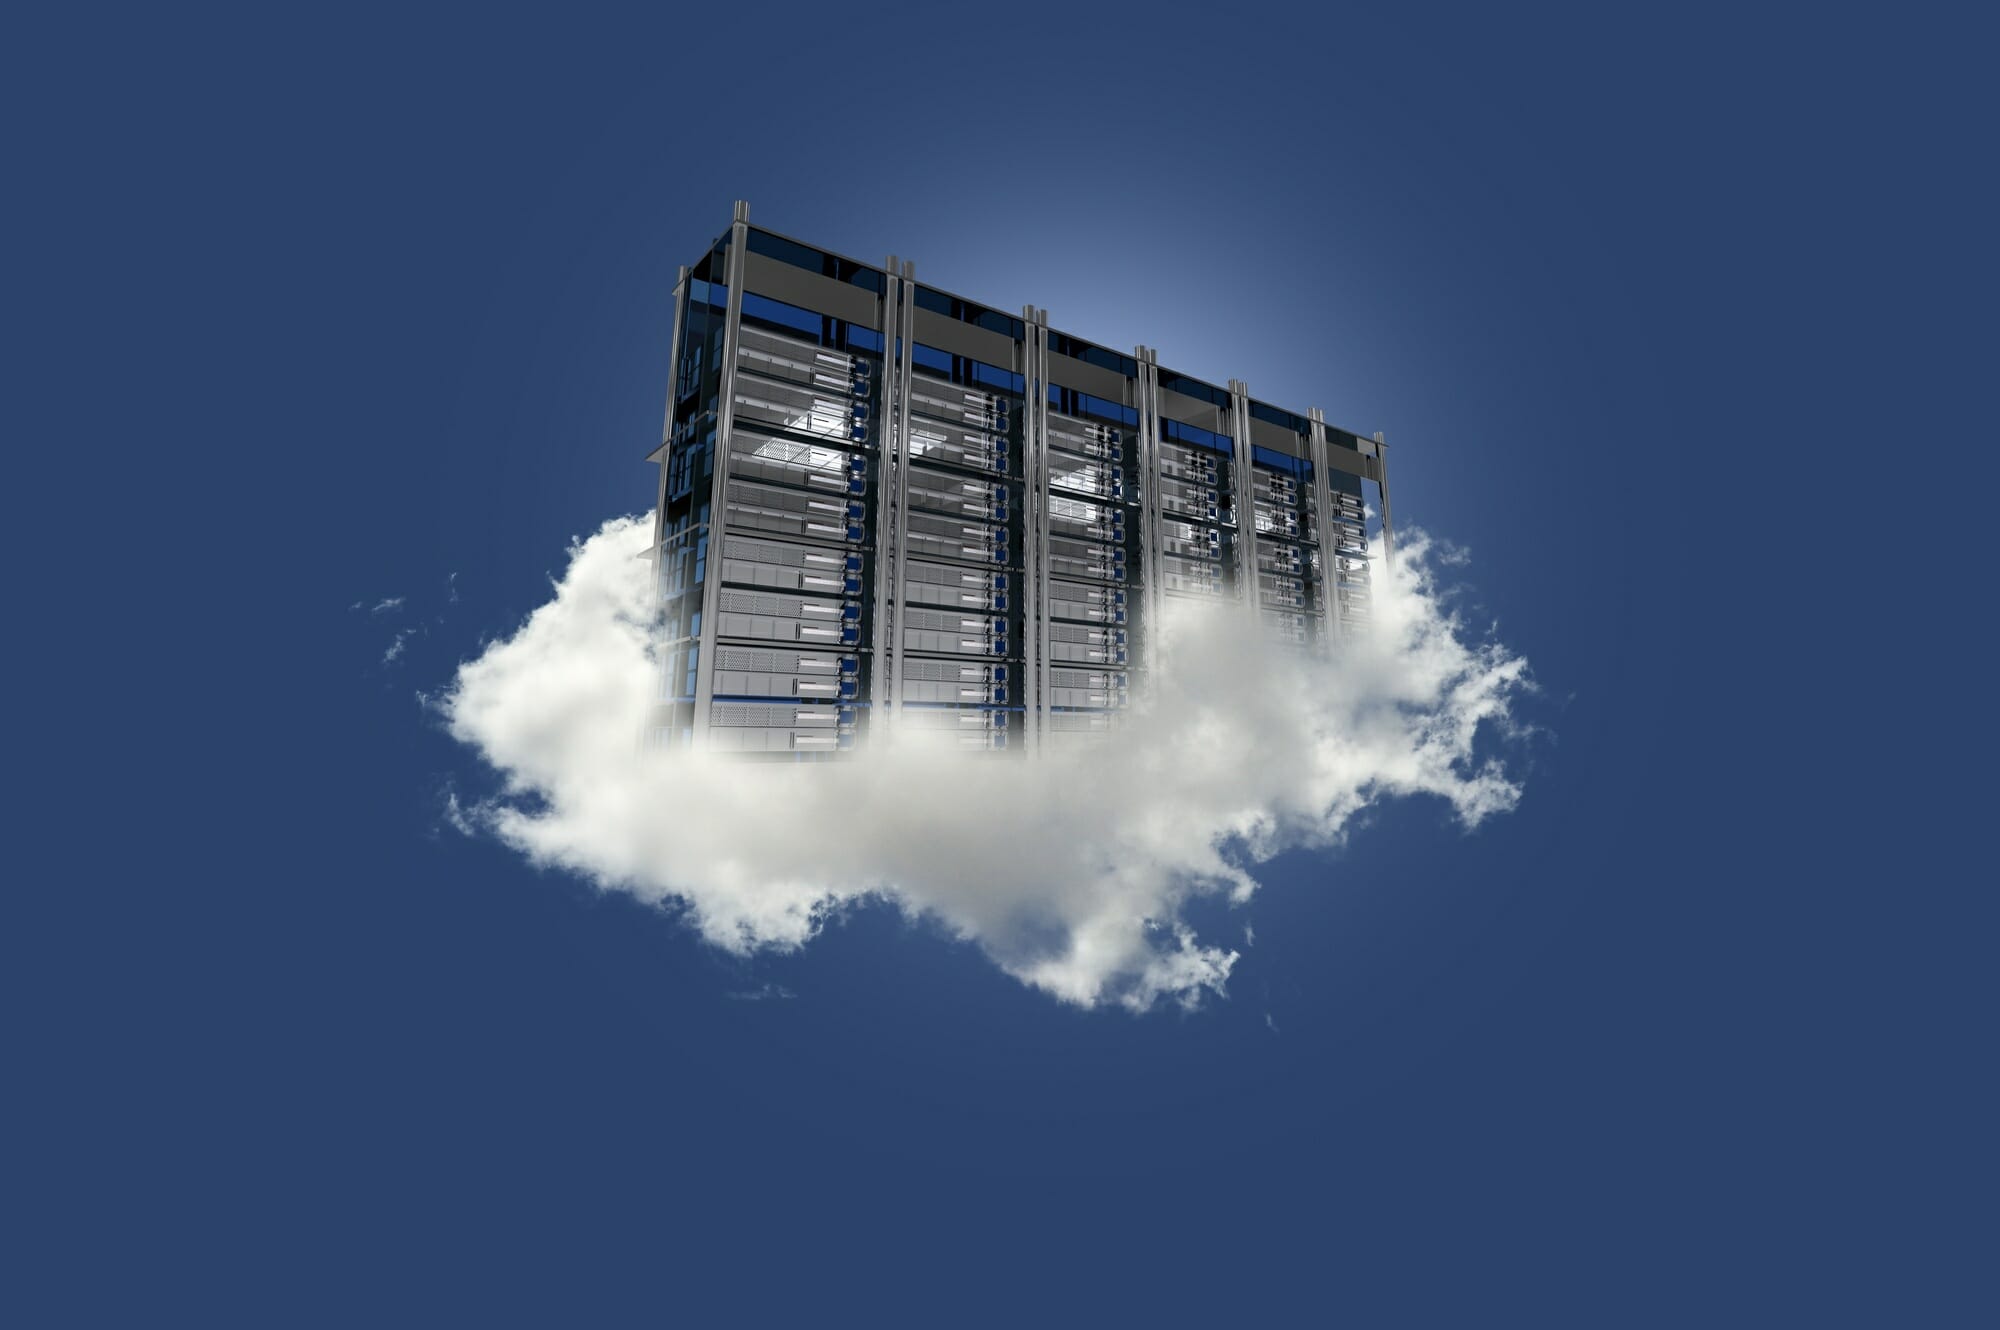 cloud computing consulting services